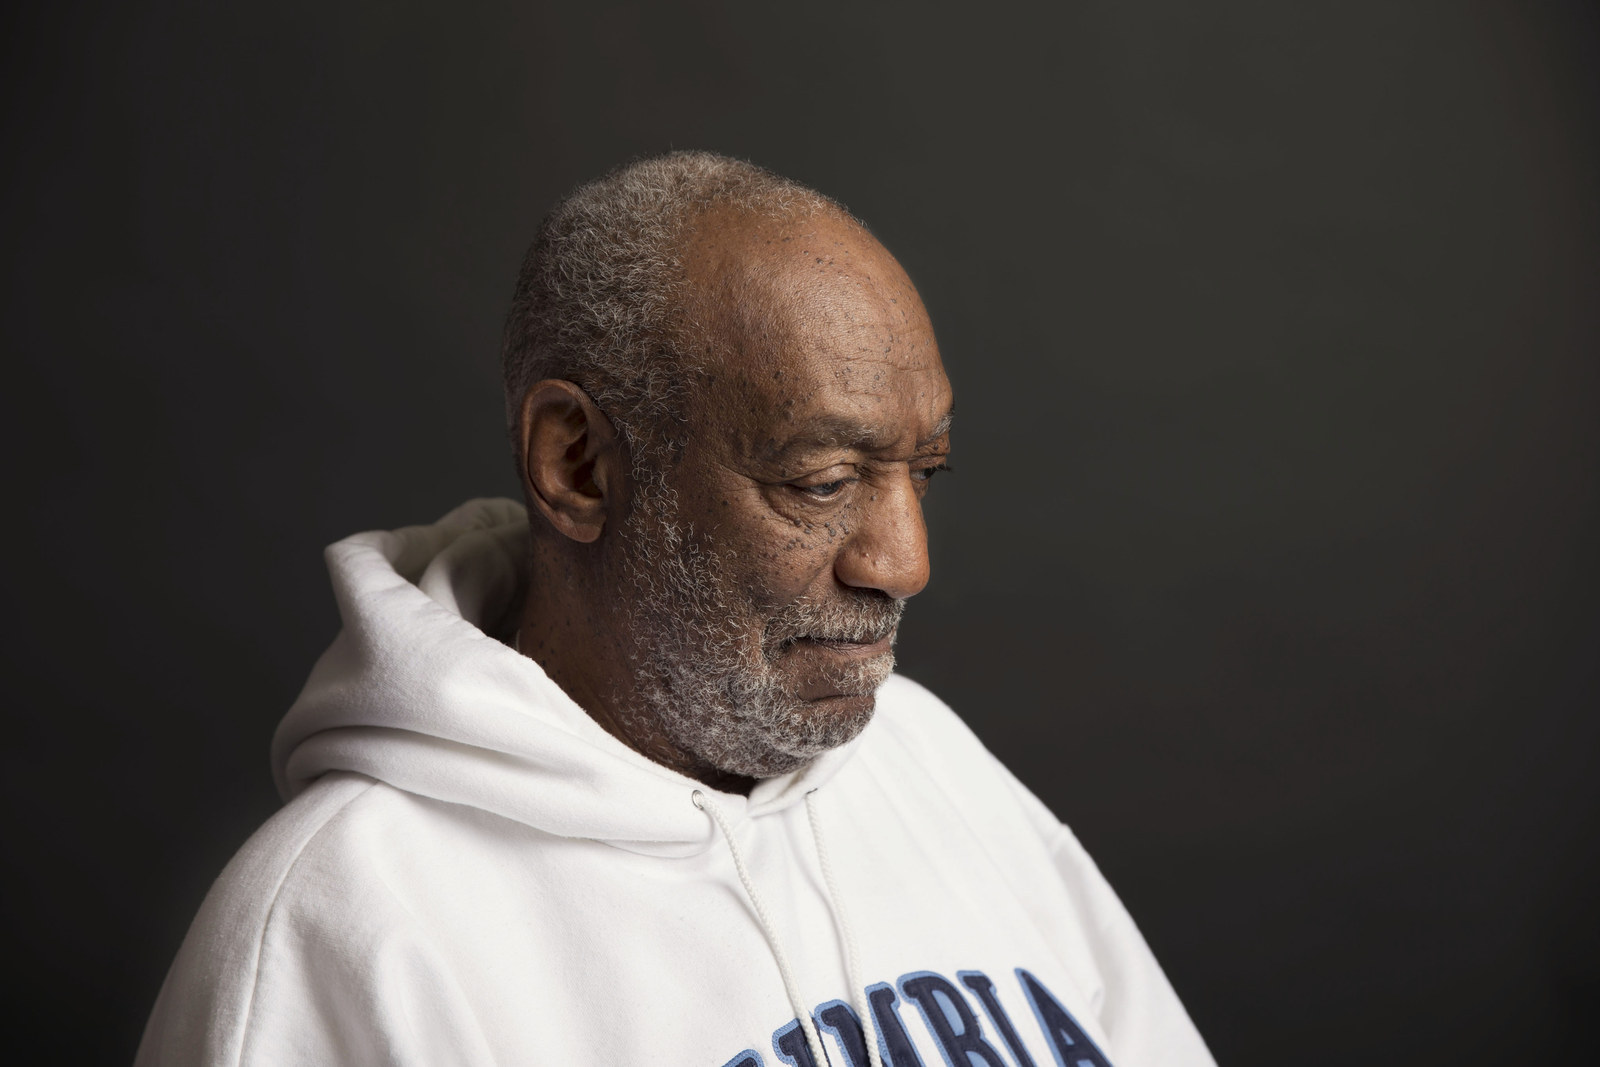 The Sedative Bill Cosby Procured For Sex Was Banned In The